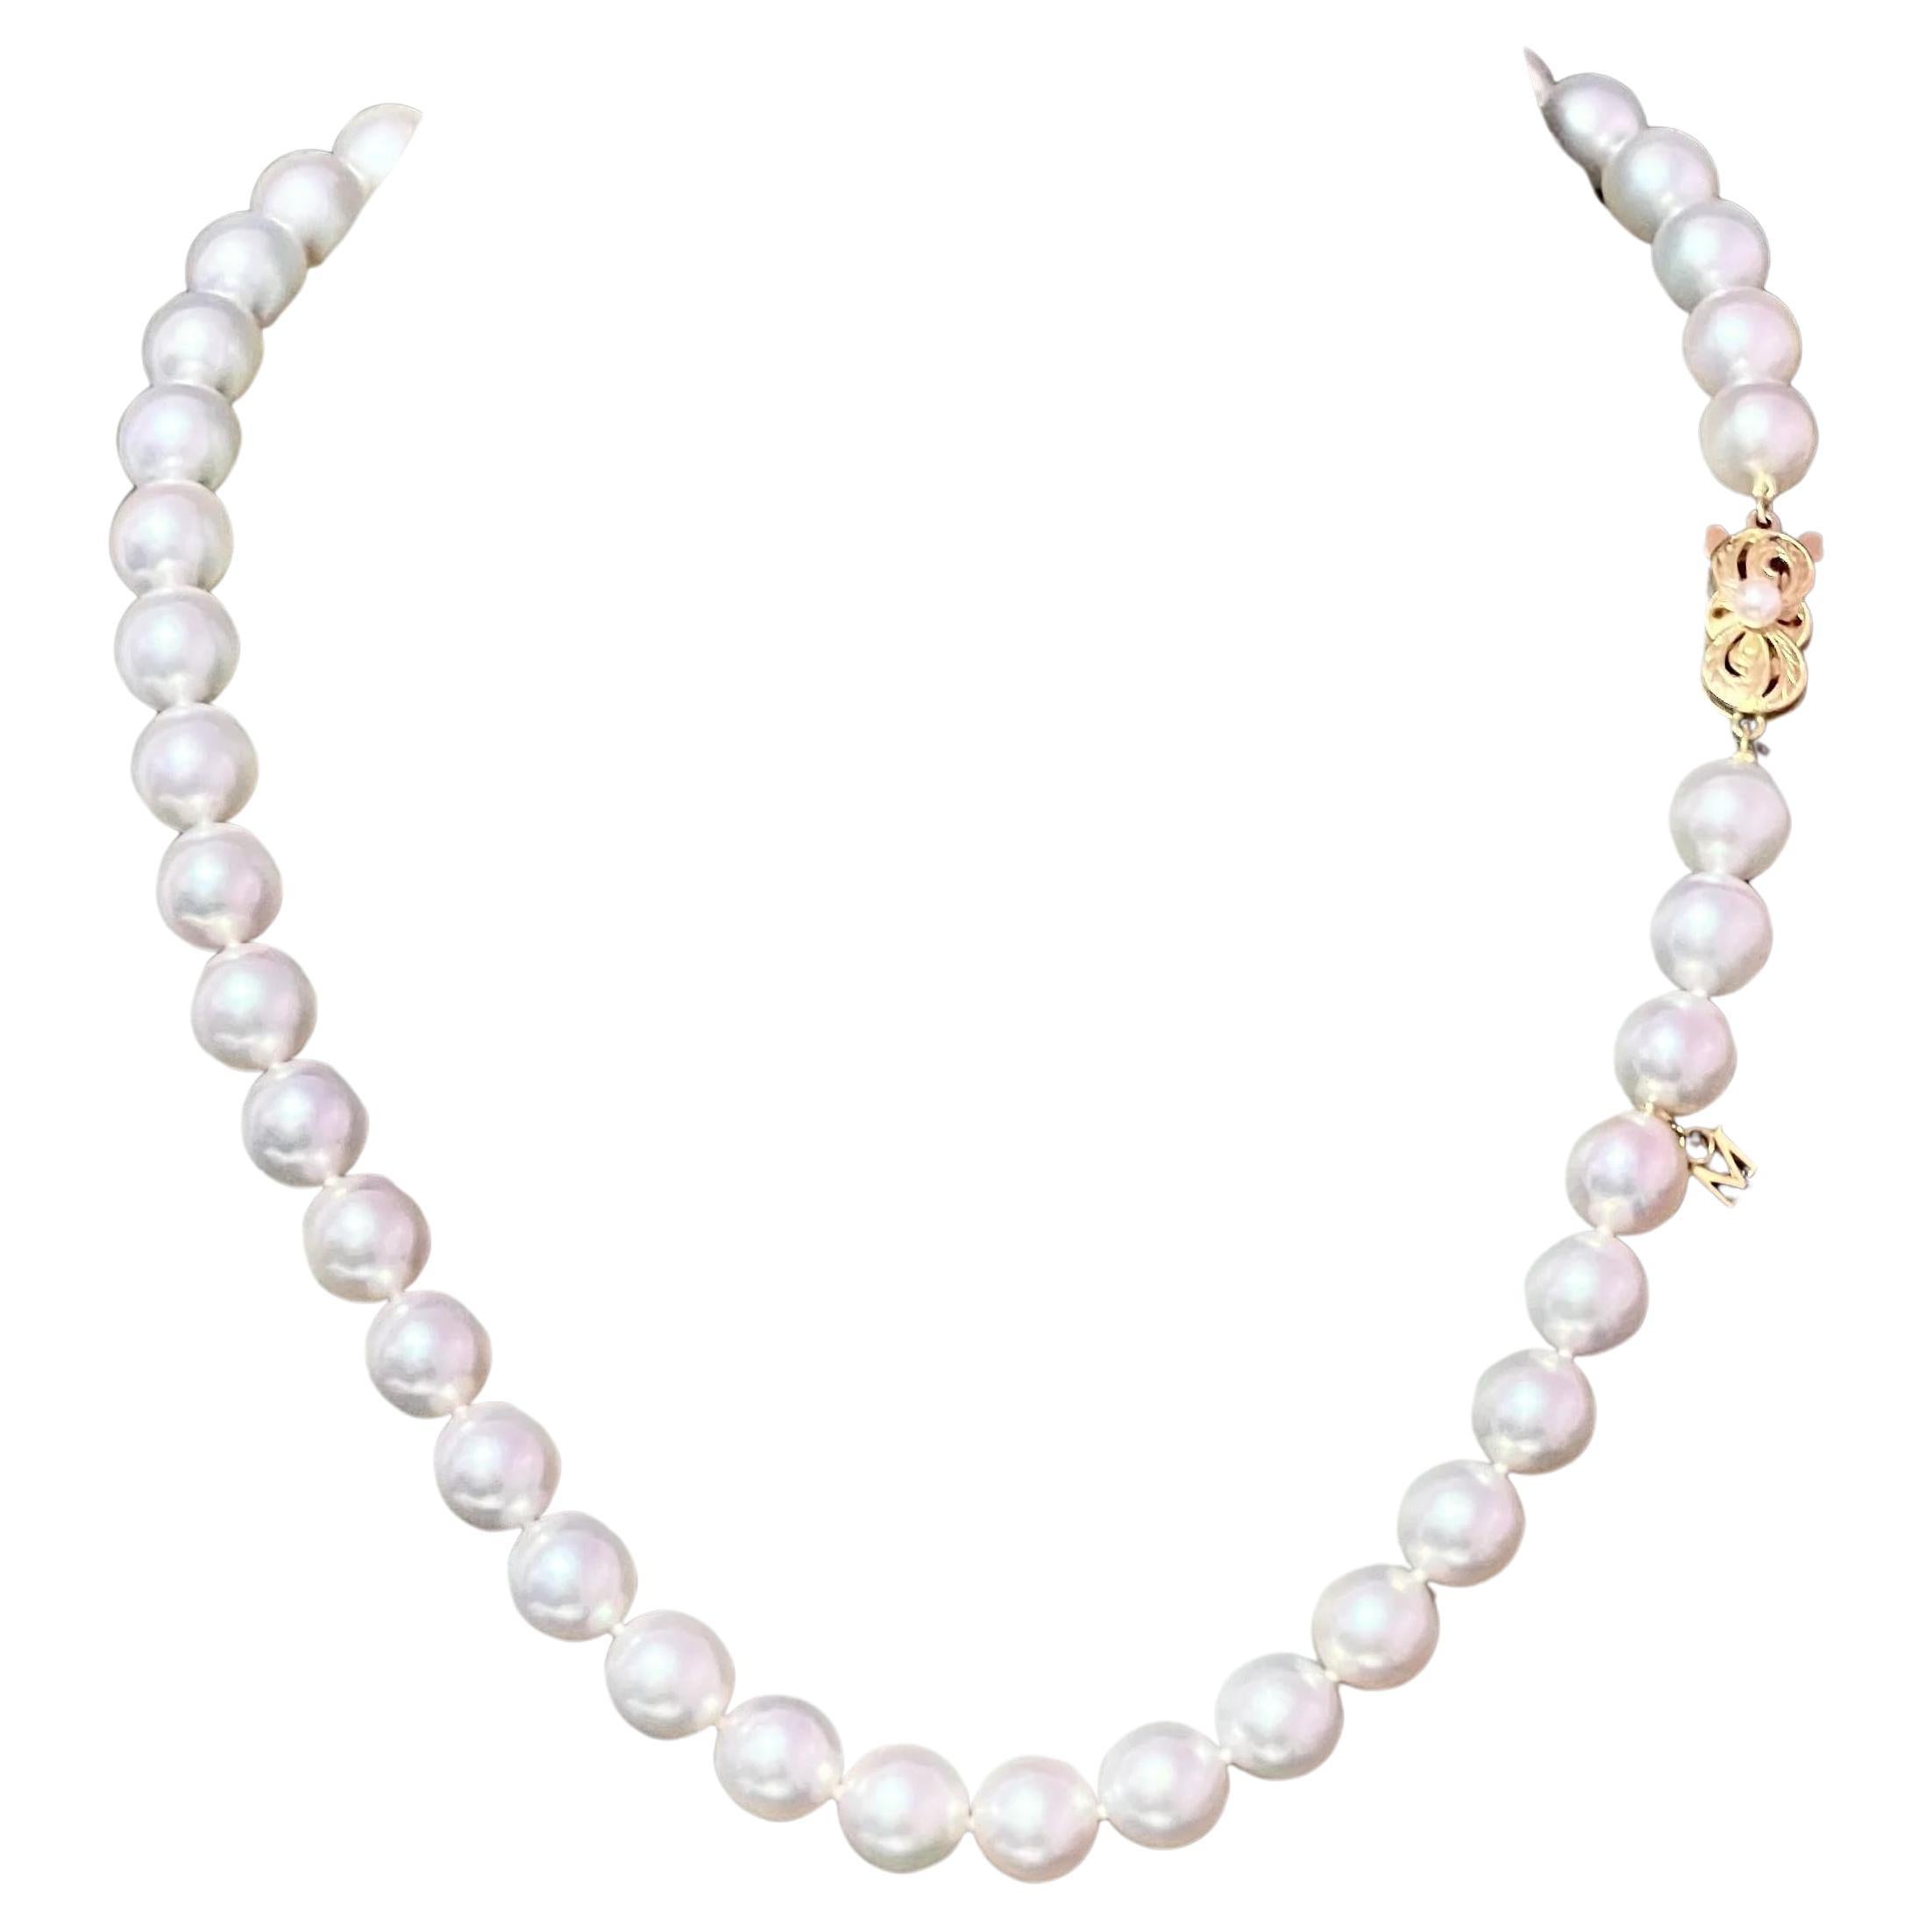 Mikimoto Estate Akoya Pearl Necklace 17.5" 18k Y Gold 9.5 mm Certified 